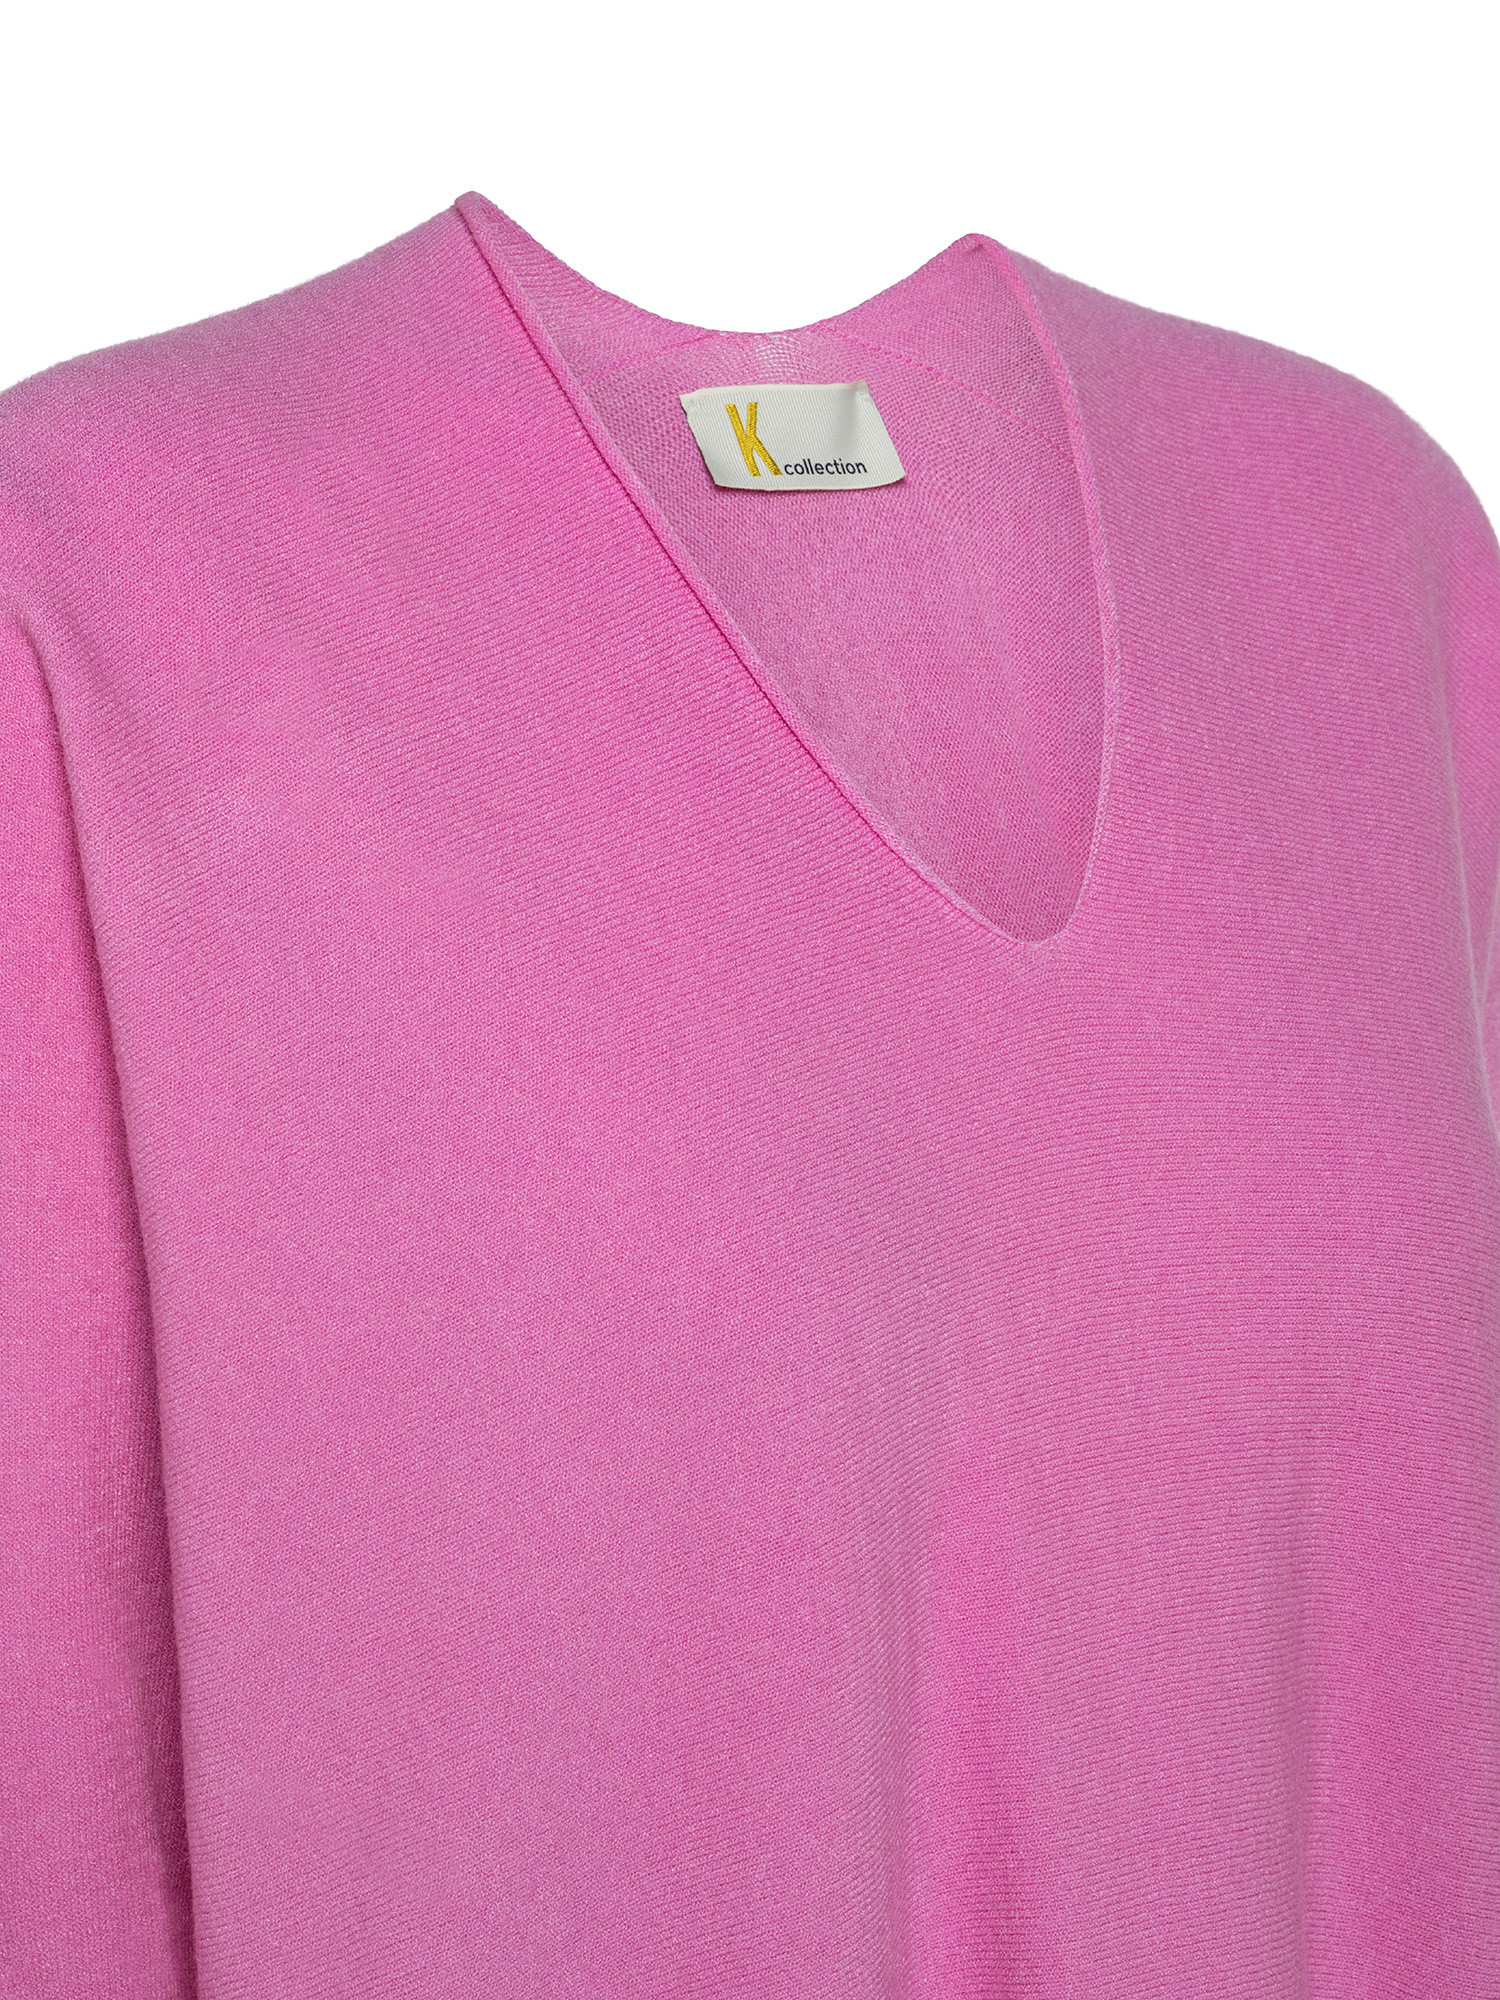 K Collection - Pullover, Pink Fuchsia, large image number 2